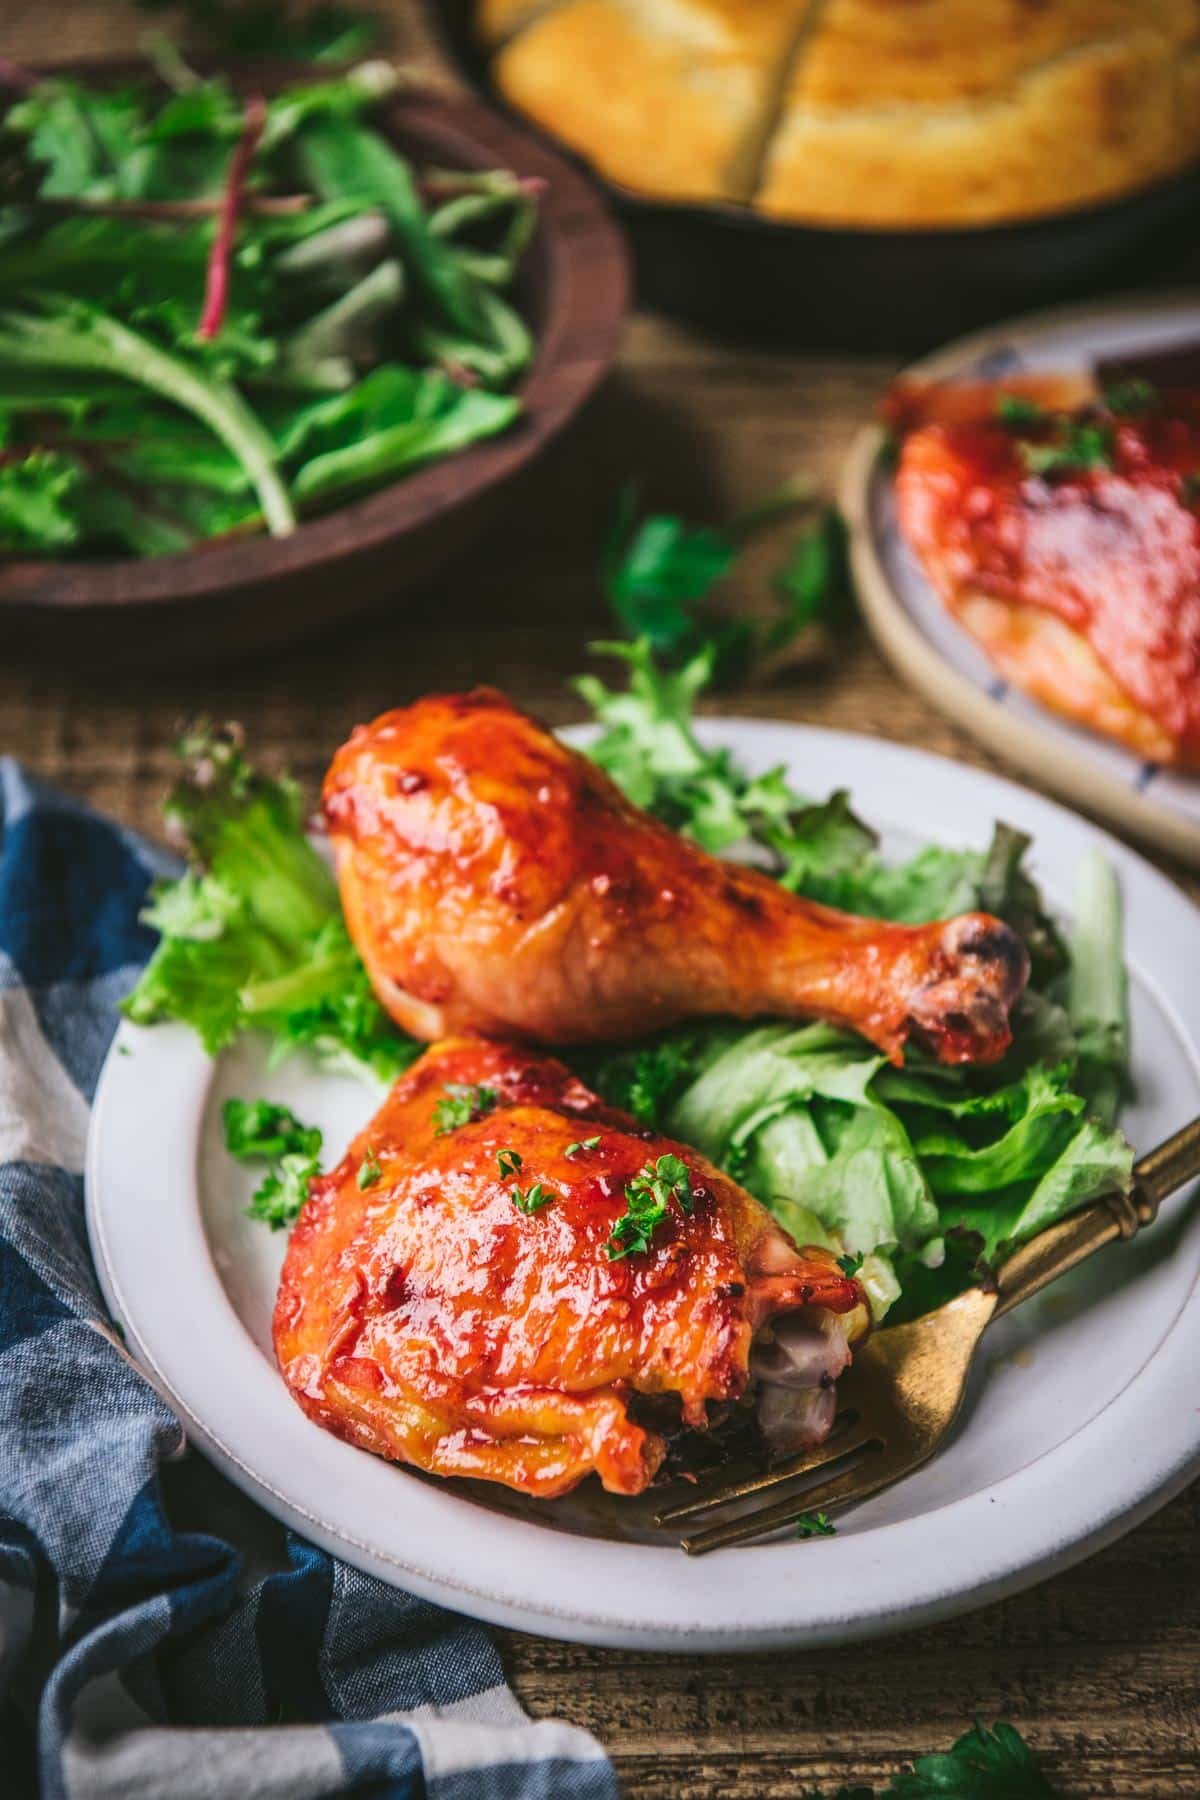 Apricot glazed chicken on a dinner table with salad and cornbread.